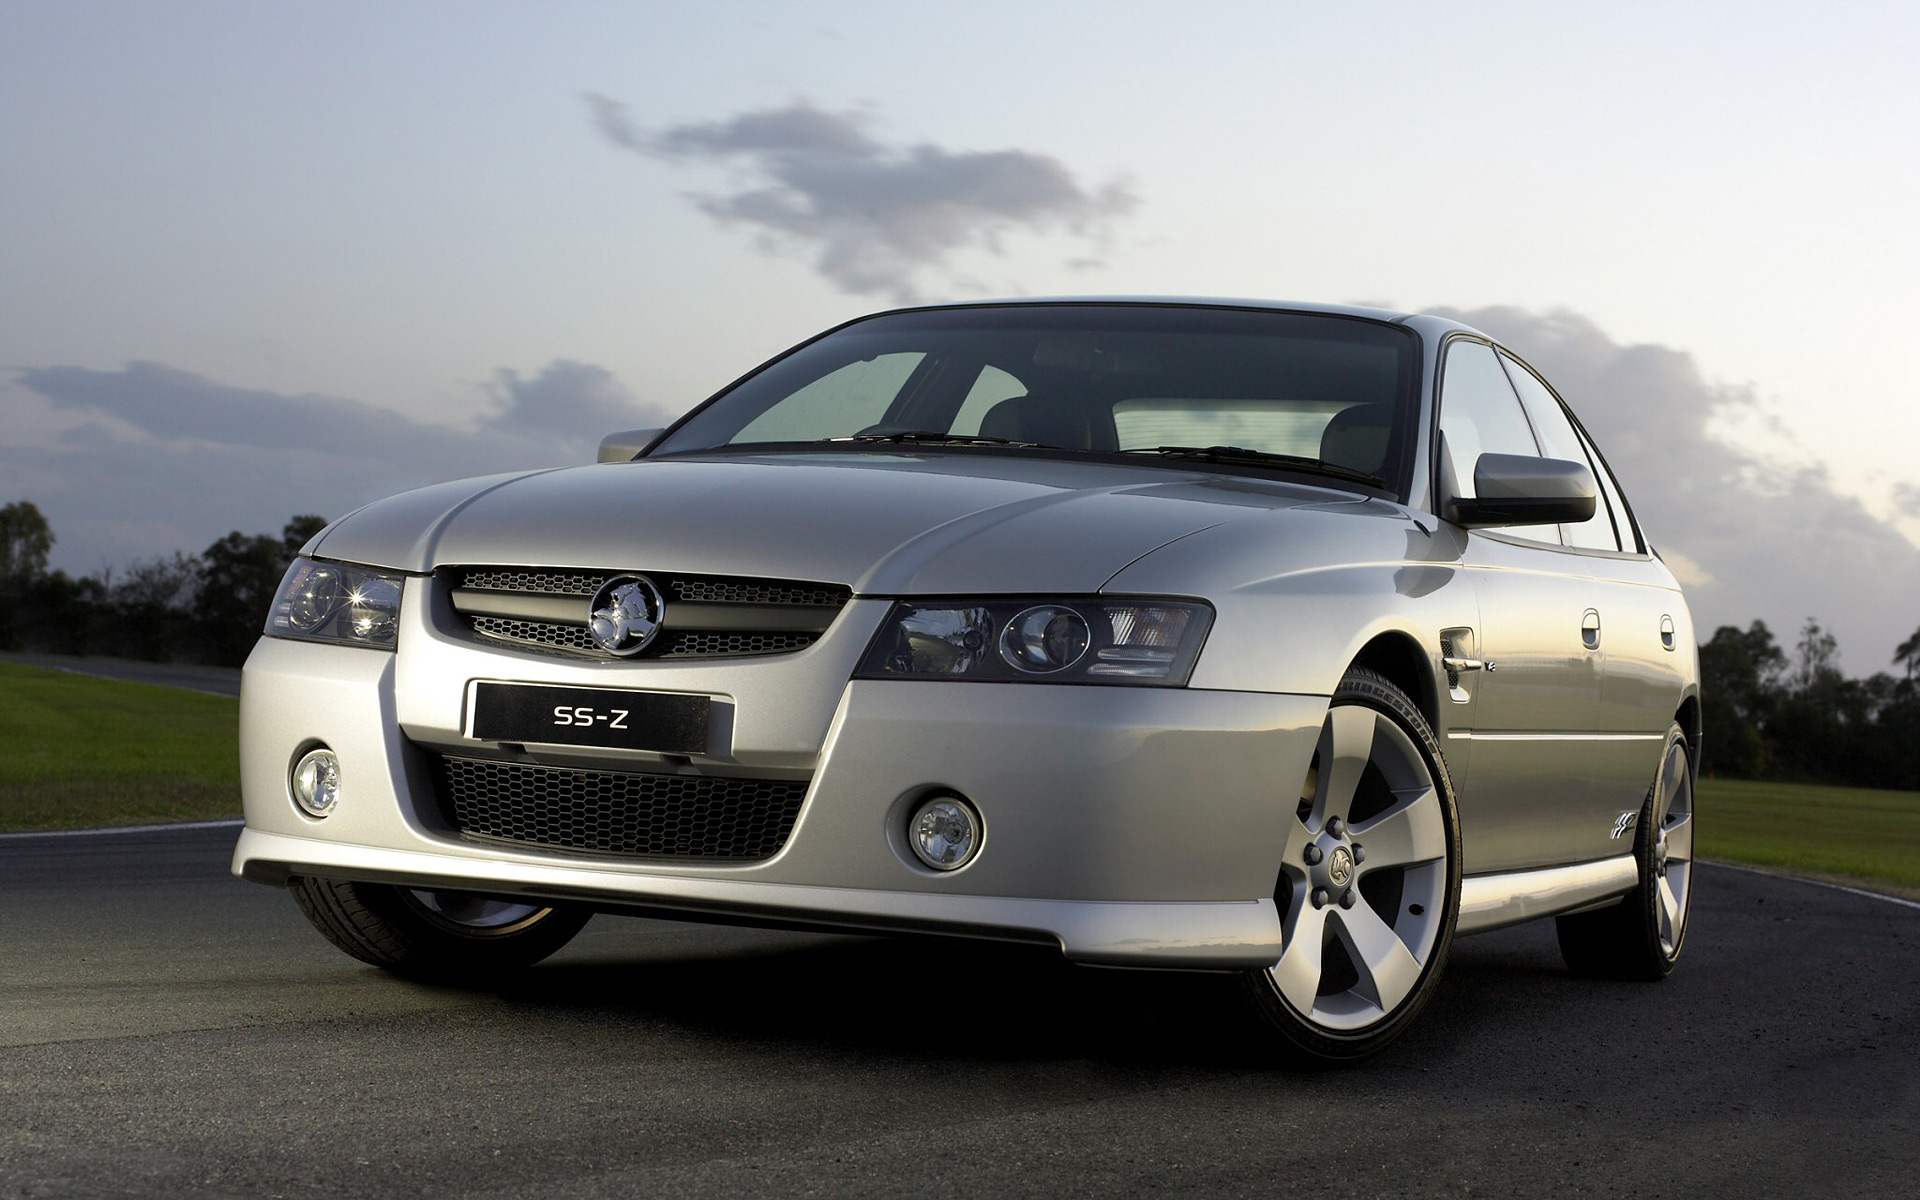  2005 Holden Commodore SS-Z Wallpaper.